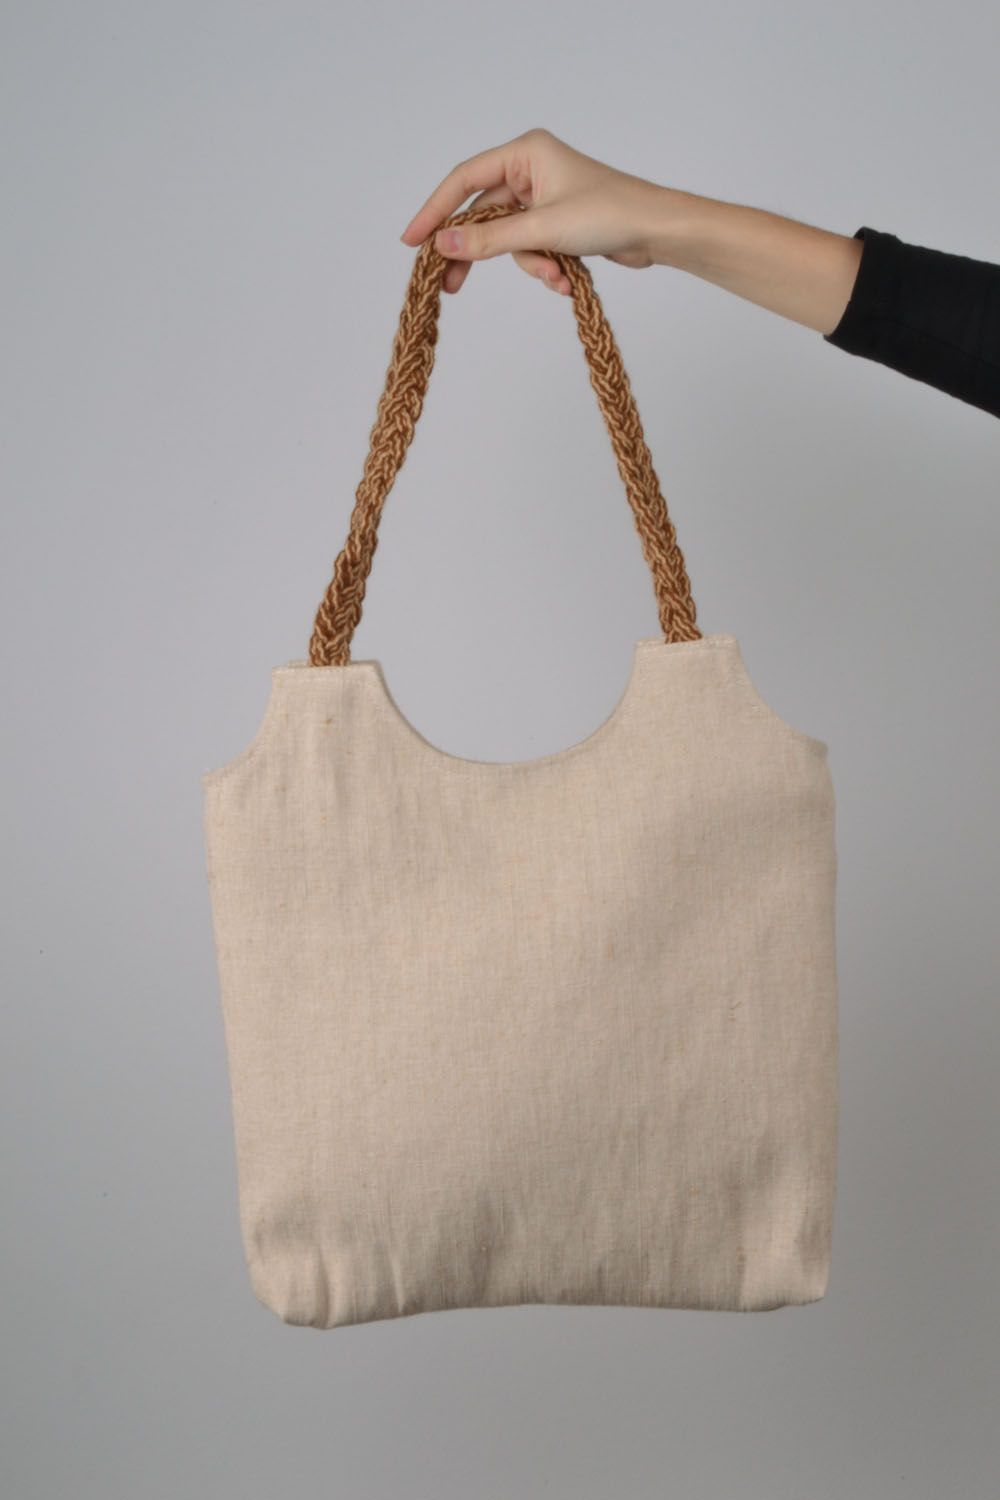 Textile bag in eco style photo 3